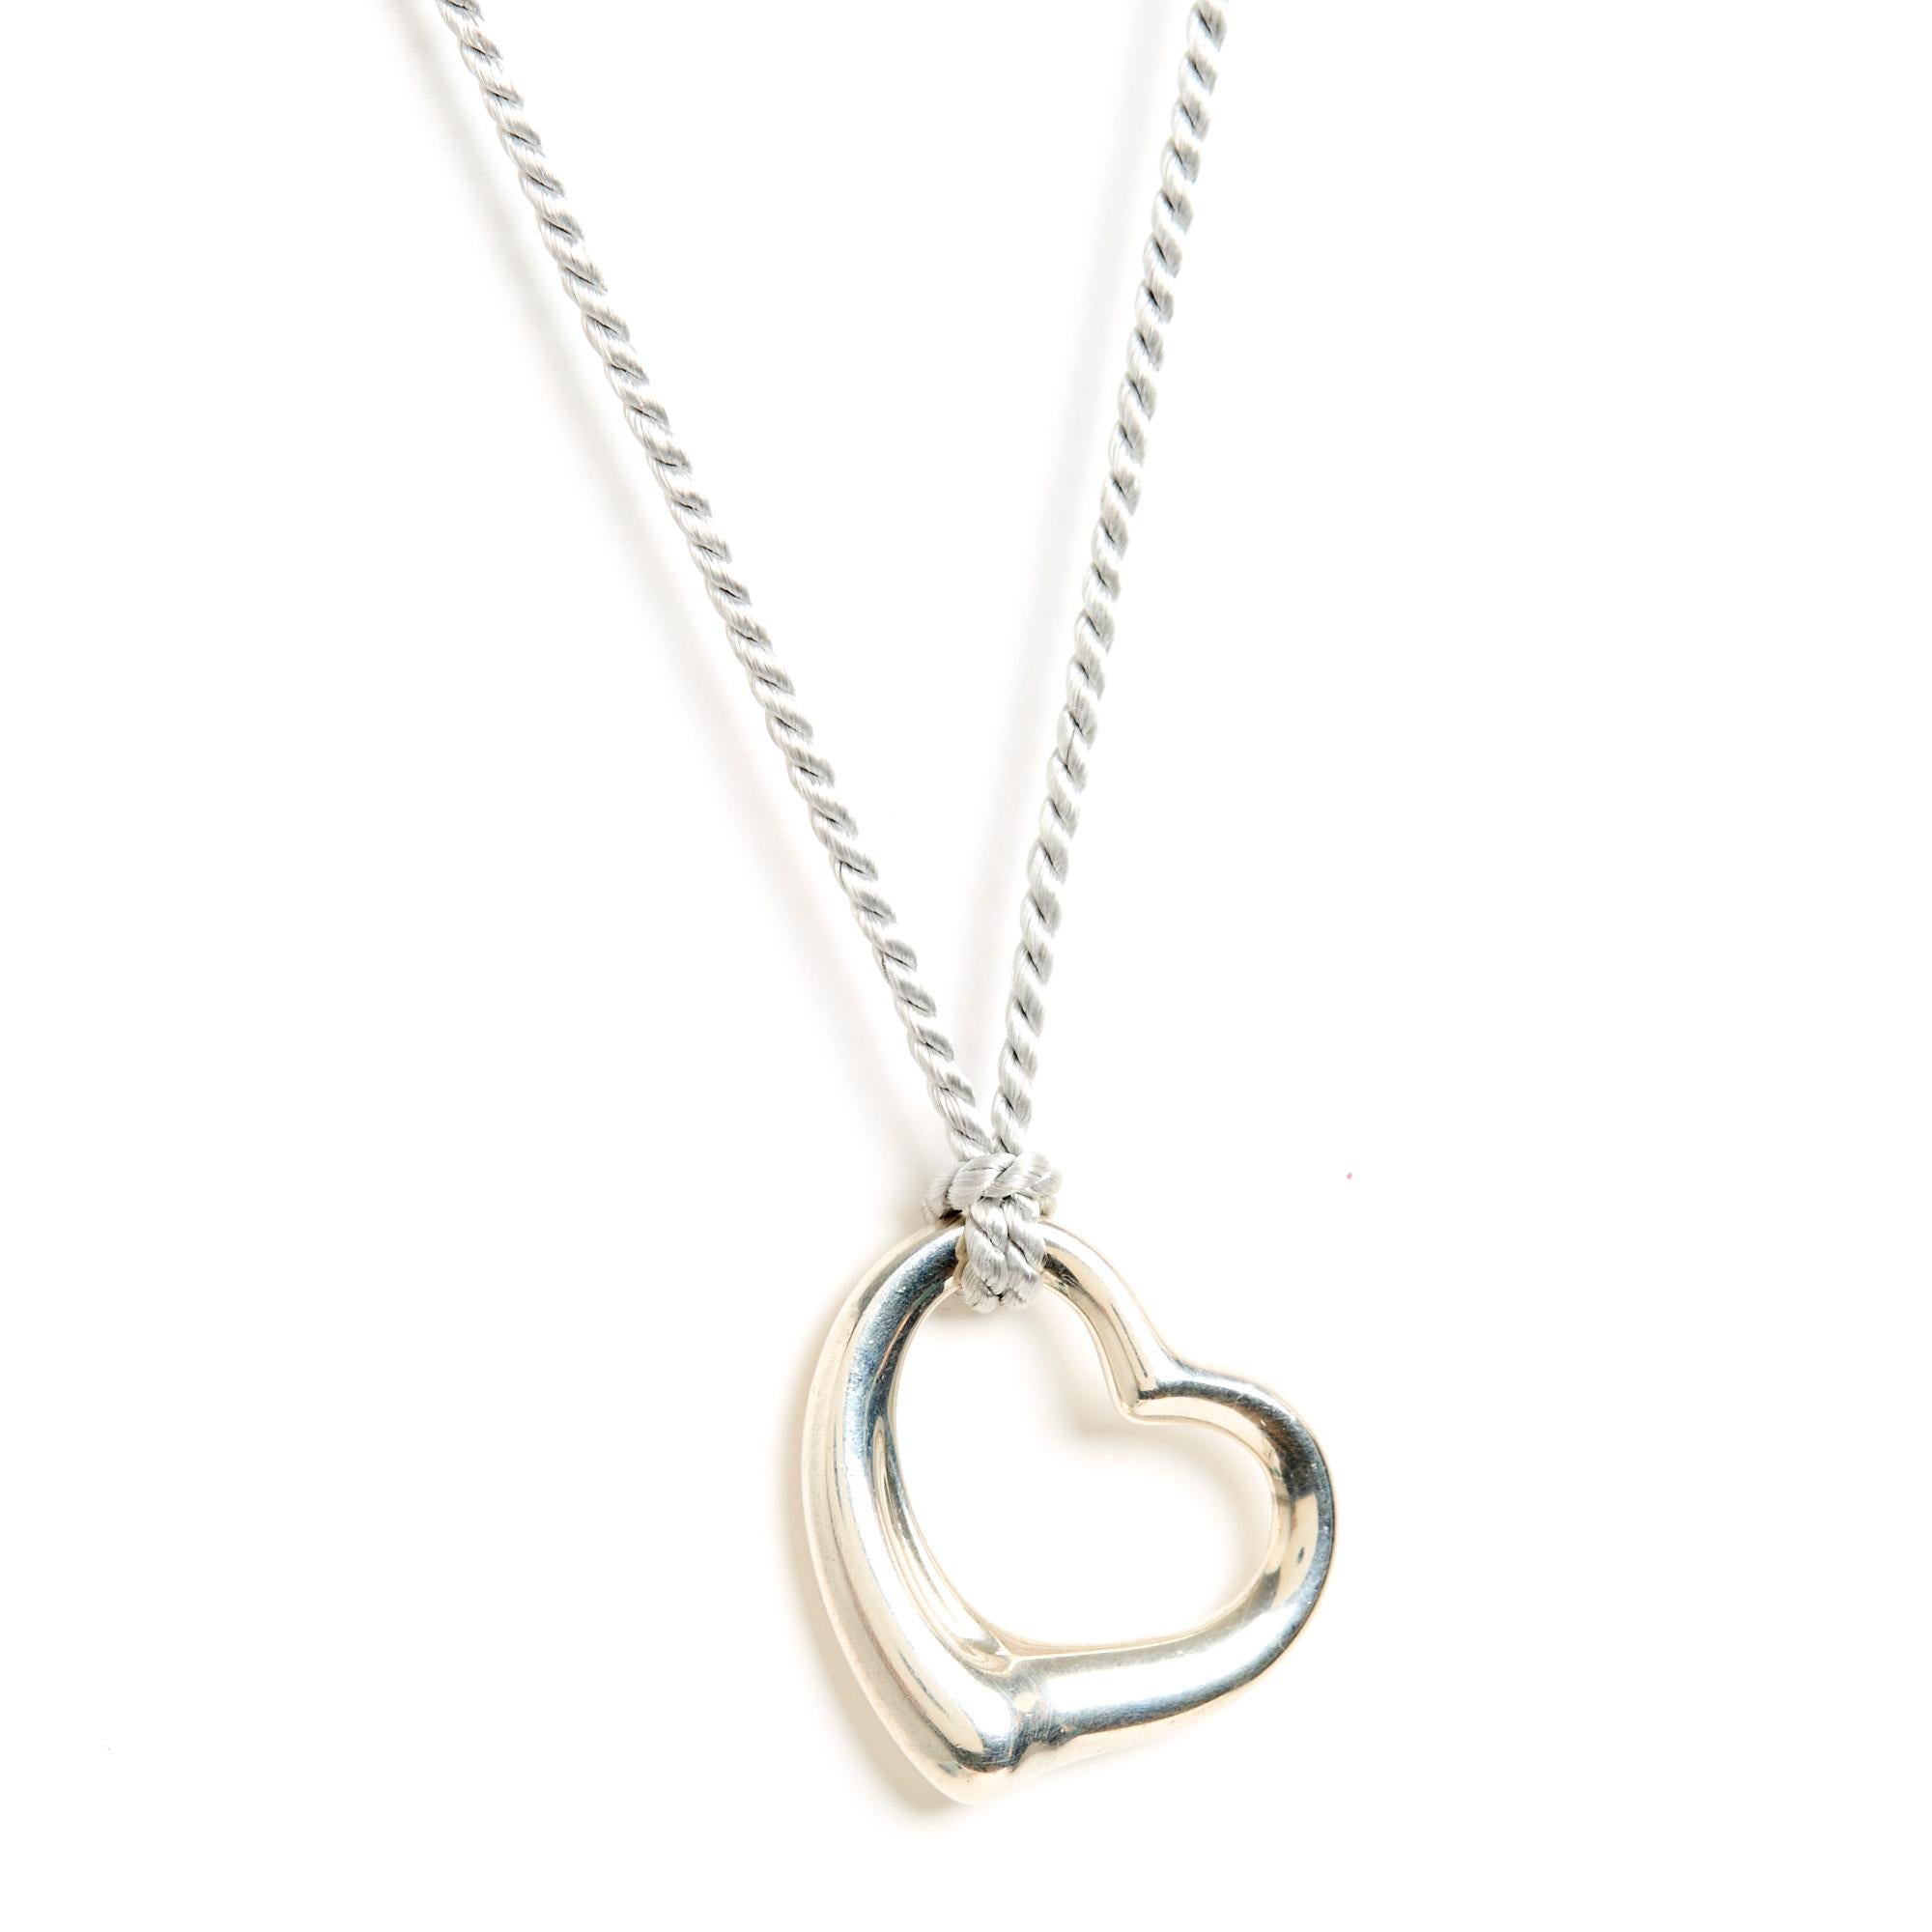 Tiffany&CO Open Heart model pendant by Elsa Peretti in GM format in solid silver, delivered on a gray trimming cord, in its original pouch and box. Width 3.6 cm x height 3.4 cm, weight (pendant only) 16.53 gr. The pendant shows slight traces of use